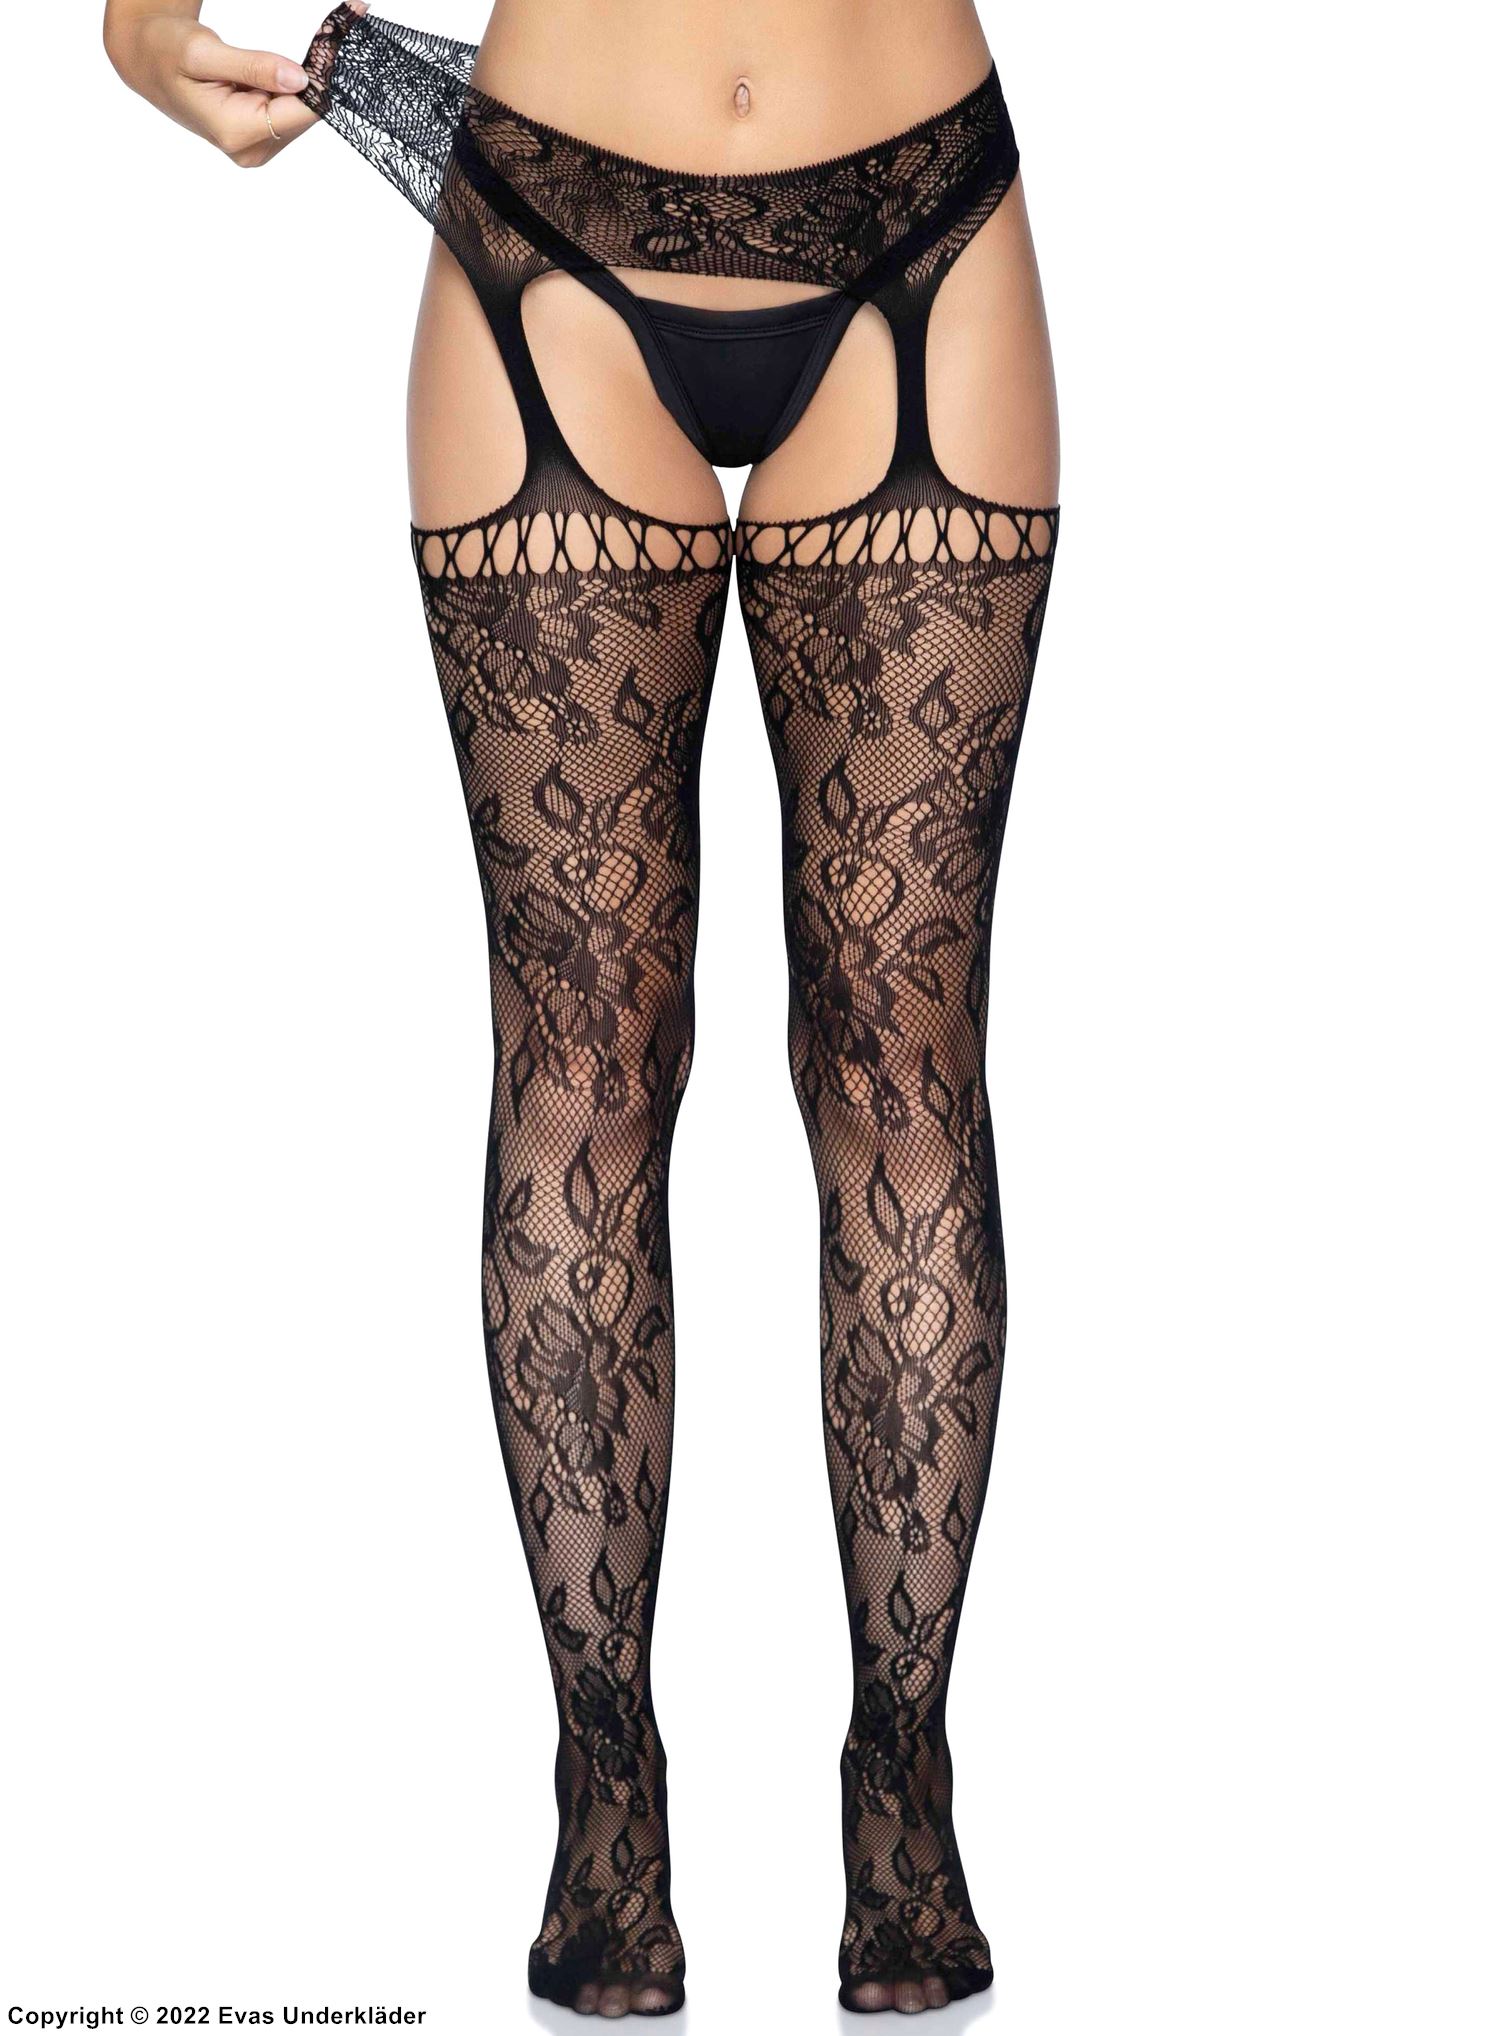 Suspender pantyhose, stretch lace, flowers